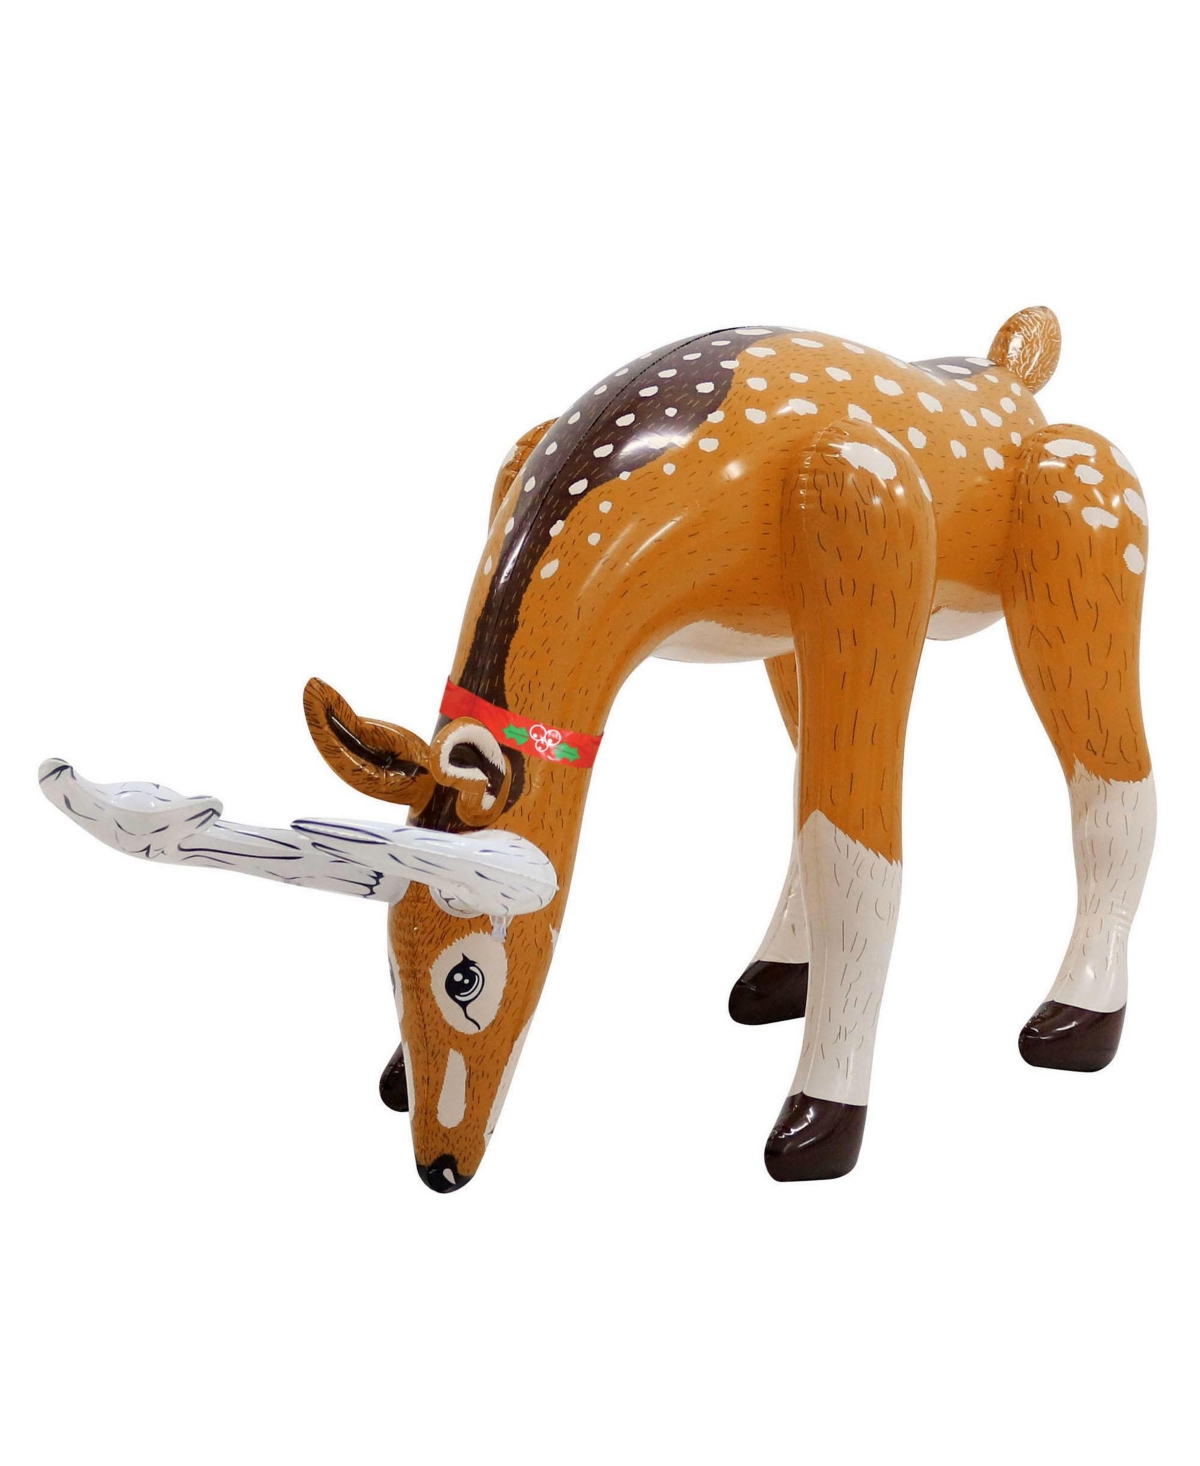 Christmas Blow-Up Inflatable Reindeer, Grazing Style, 48" - Brown